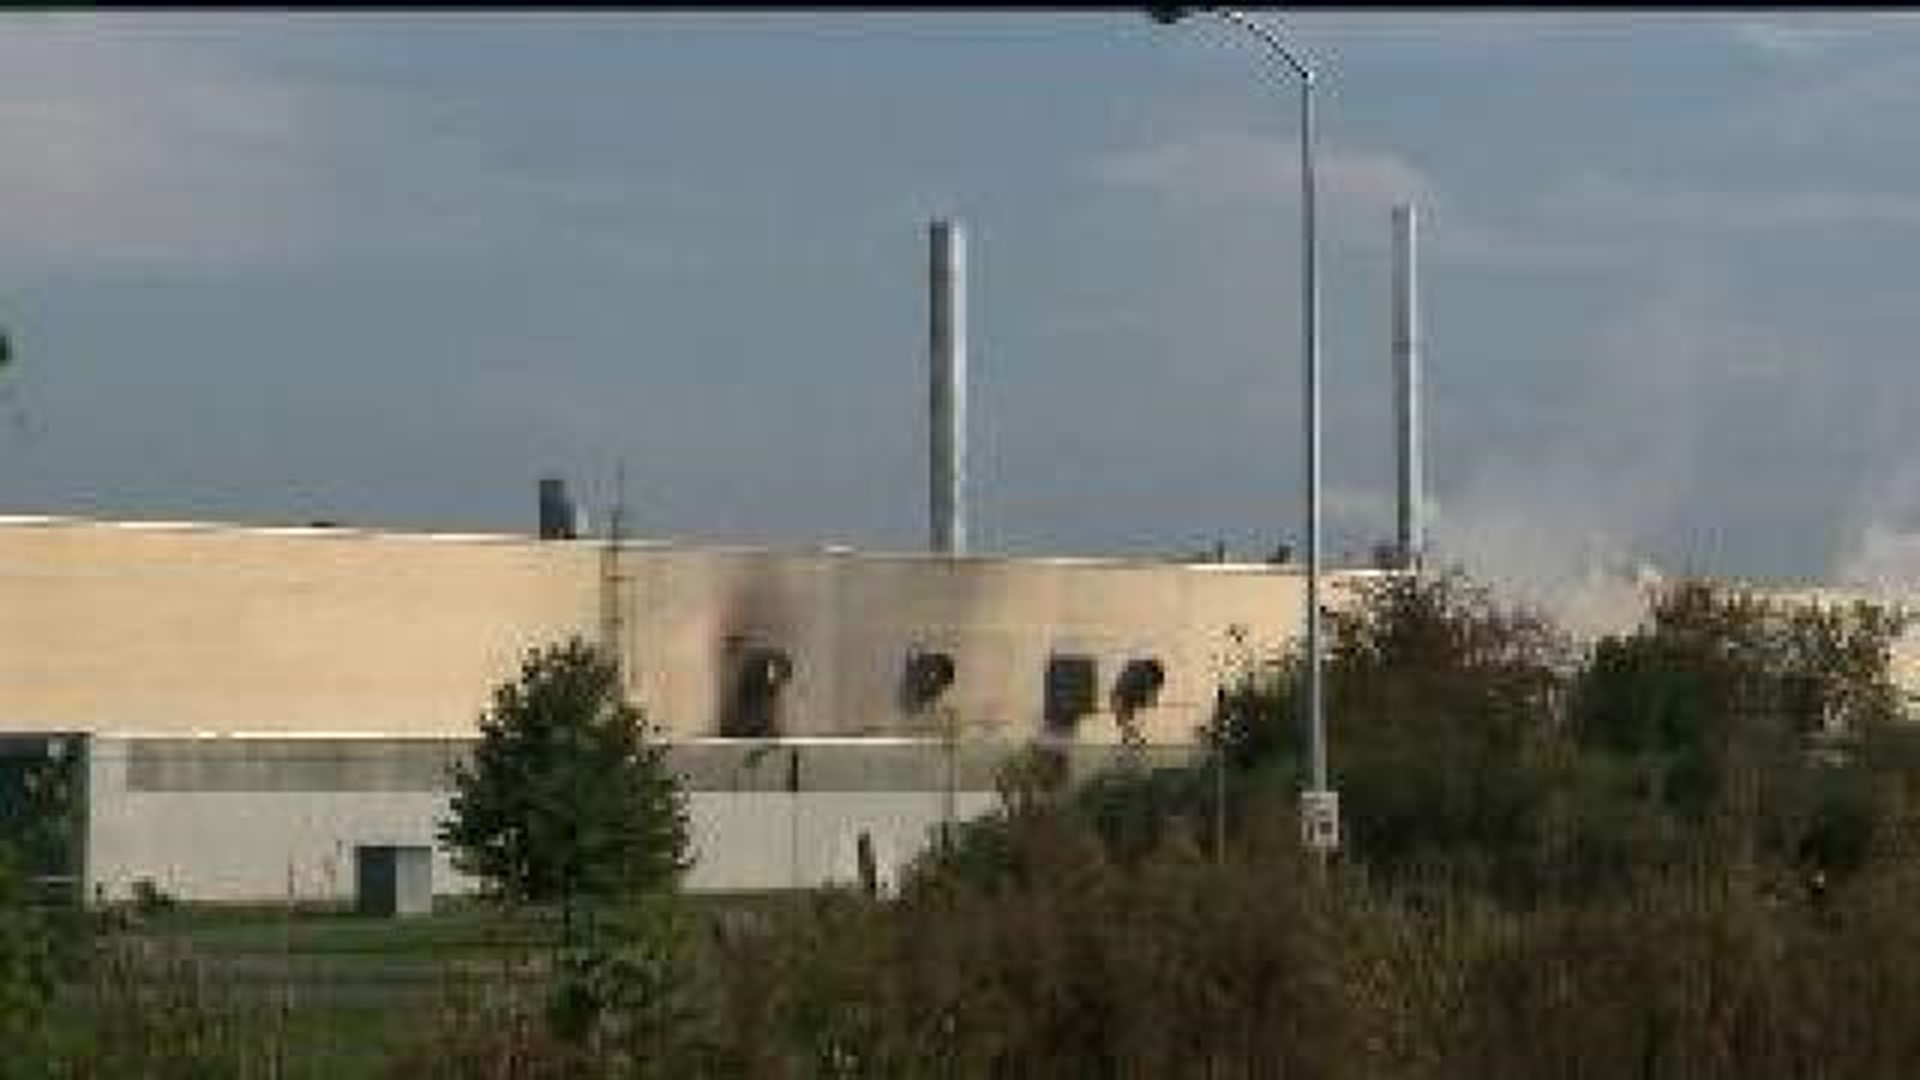 Proposed Tire Burning Facility Will Not Be Built